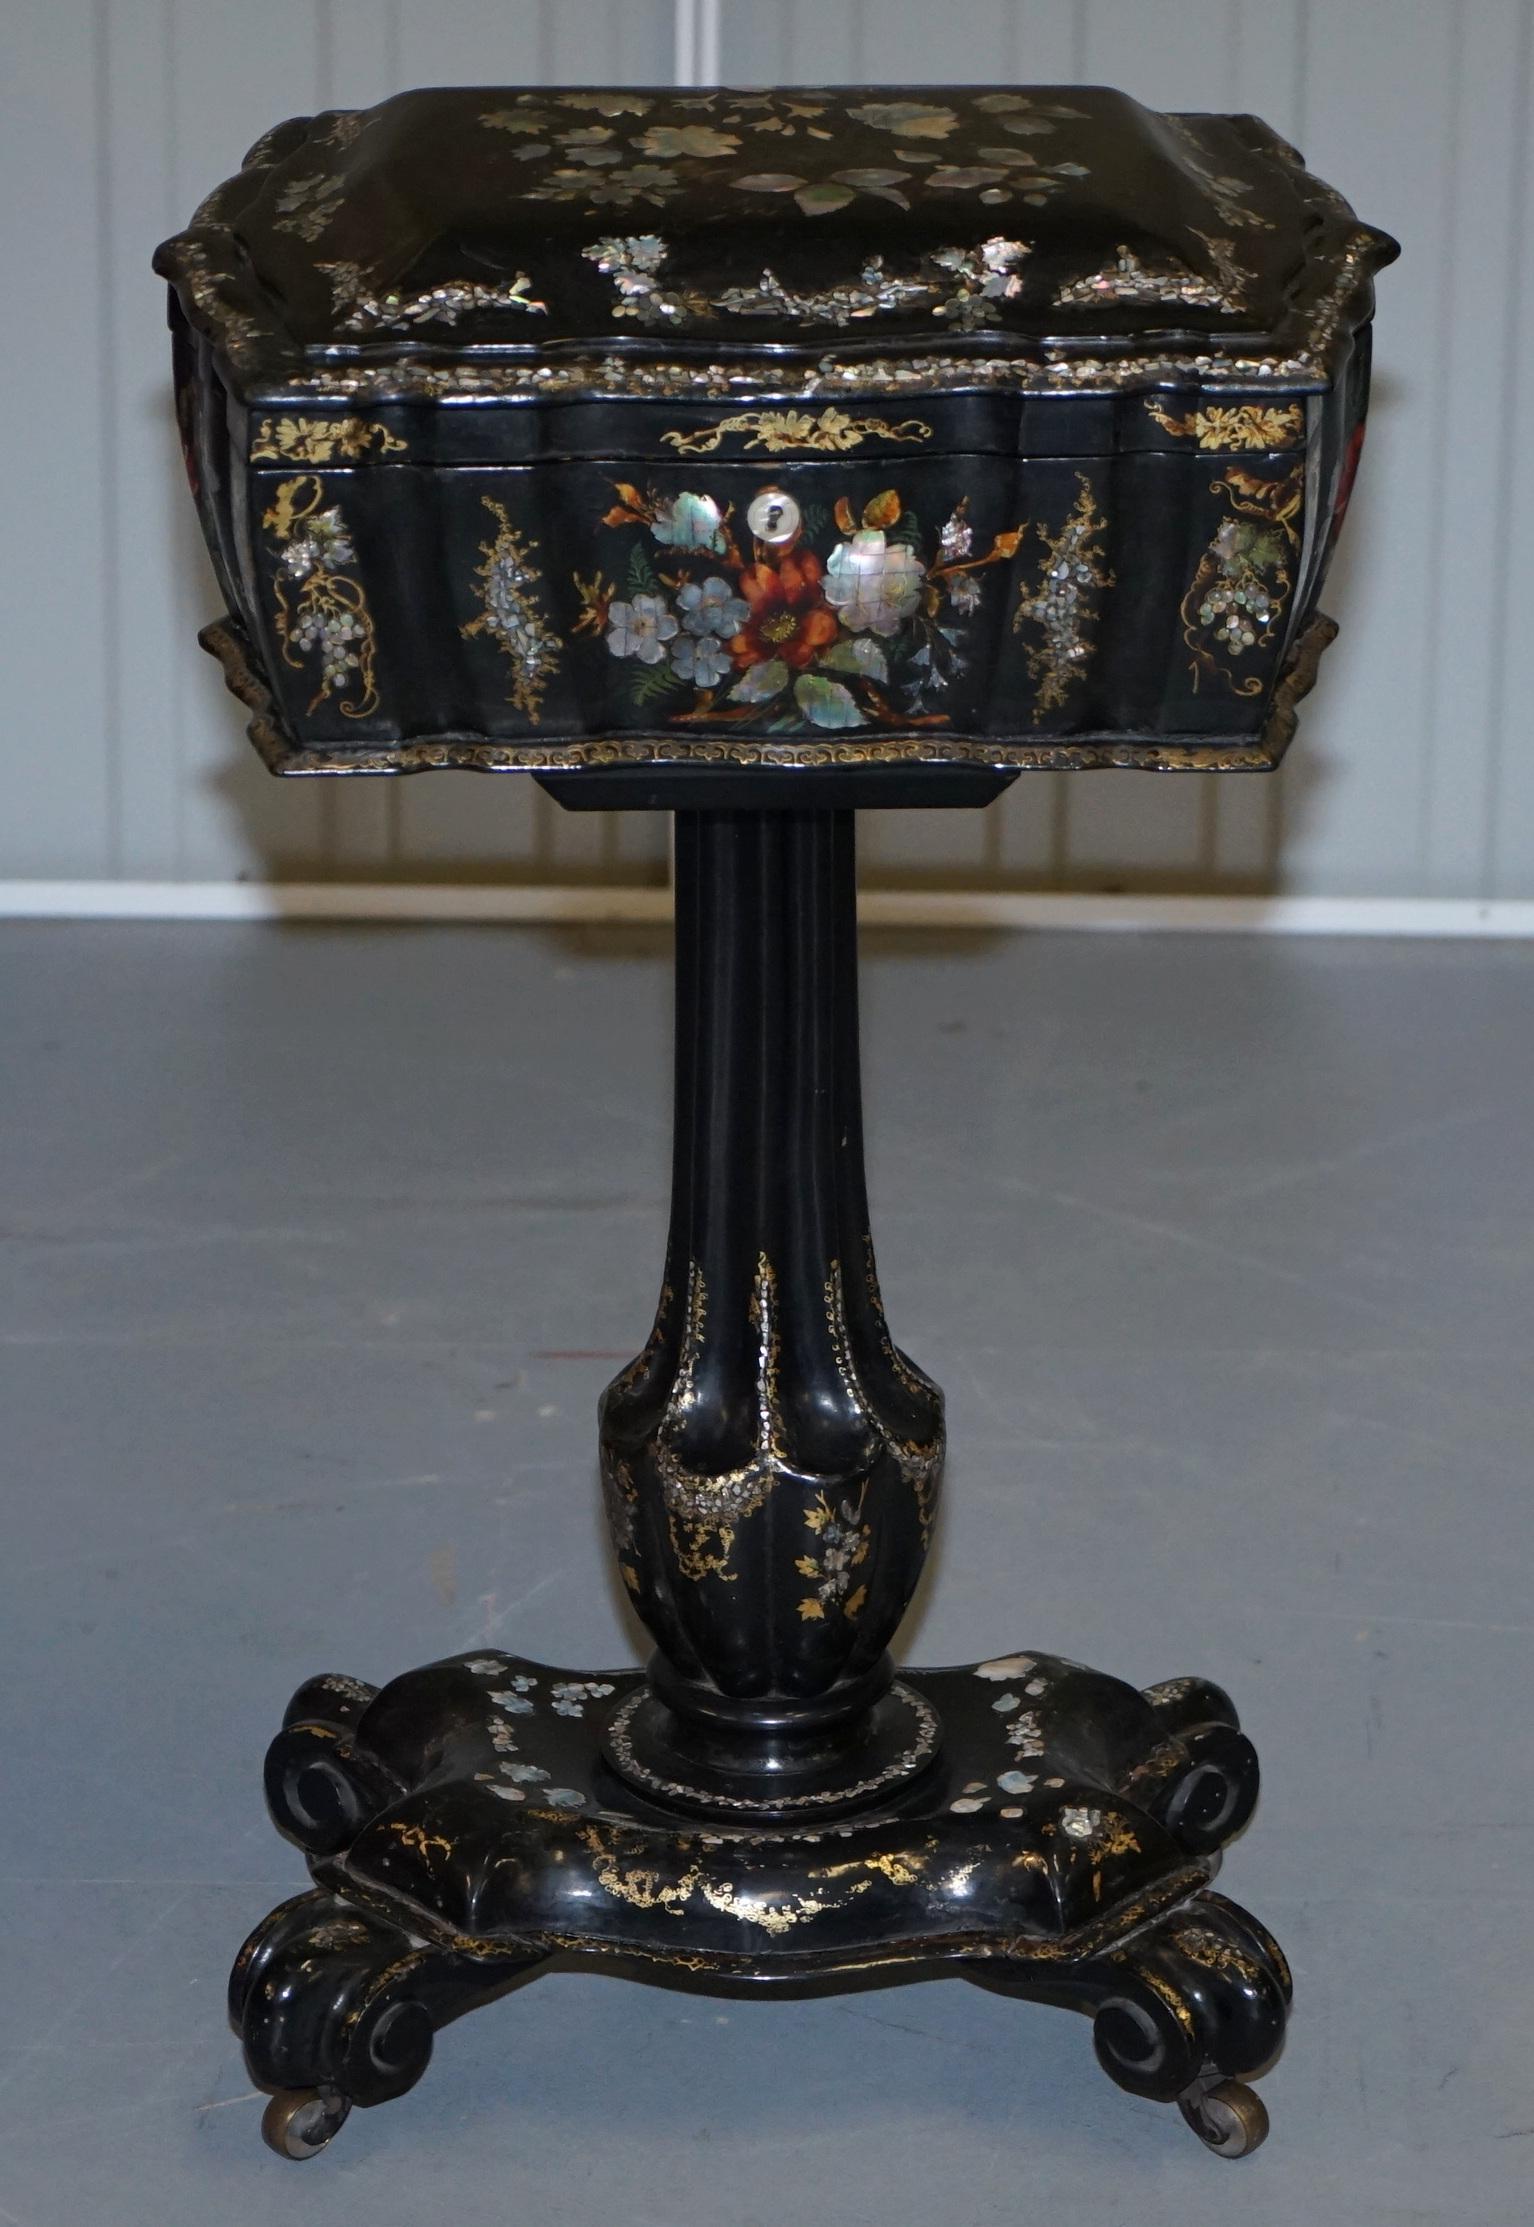 We are delighted to offer for sale this absolutely sublime original Victorian papier mâché sewing box work table

A stunning early Victorian Papier Mache sewing table in the style of Jennens & Betridge. Of rectangle tapered form with black lacquer